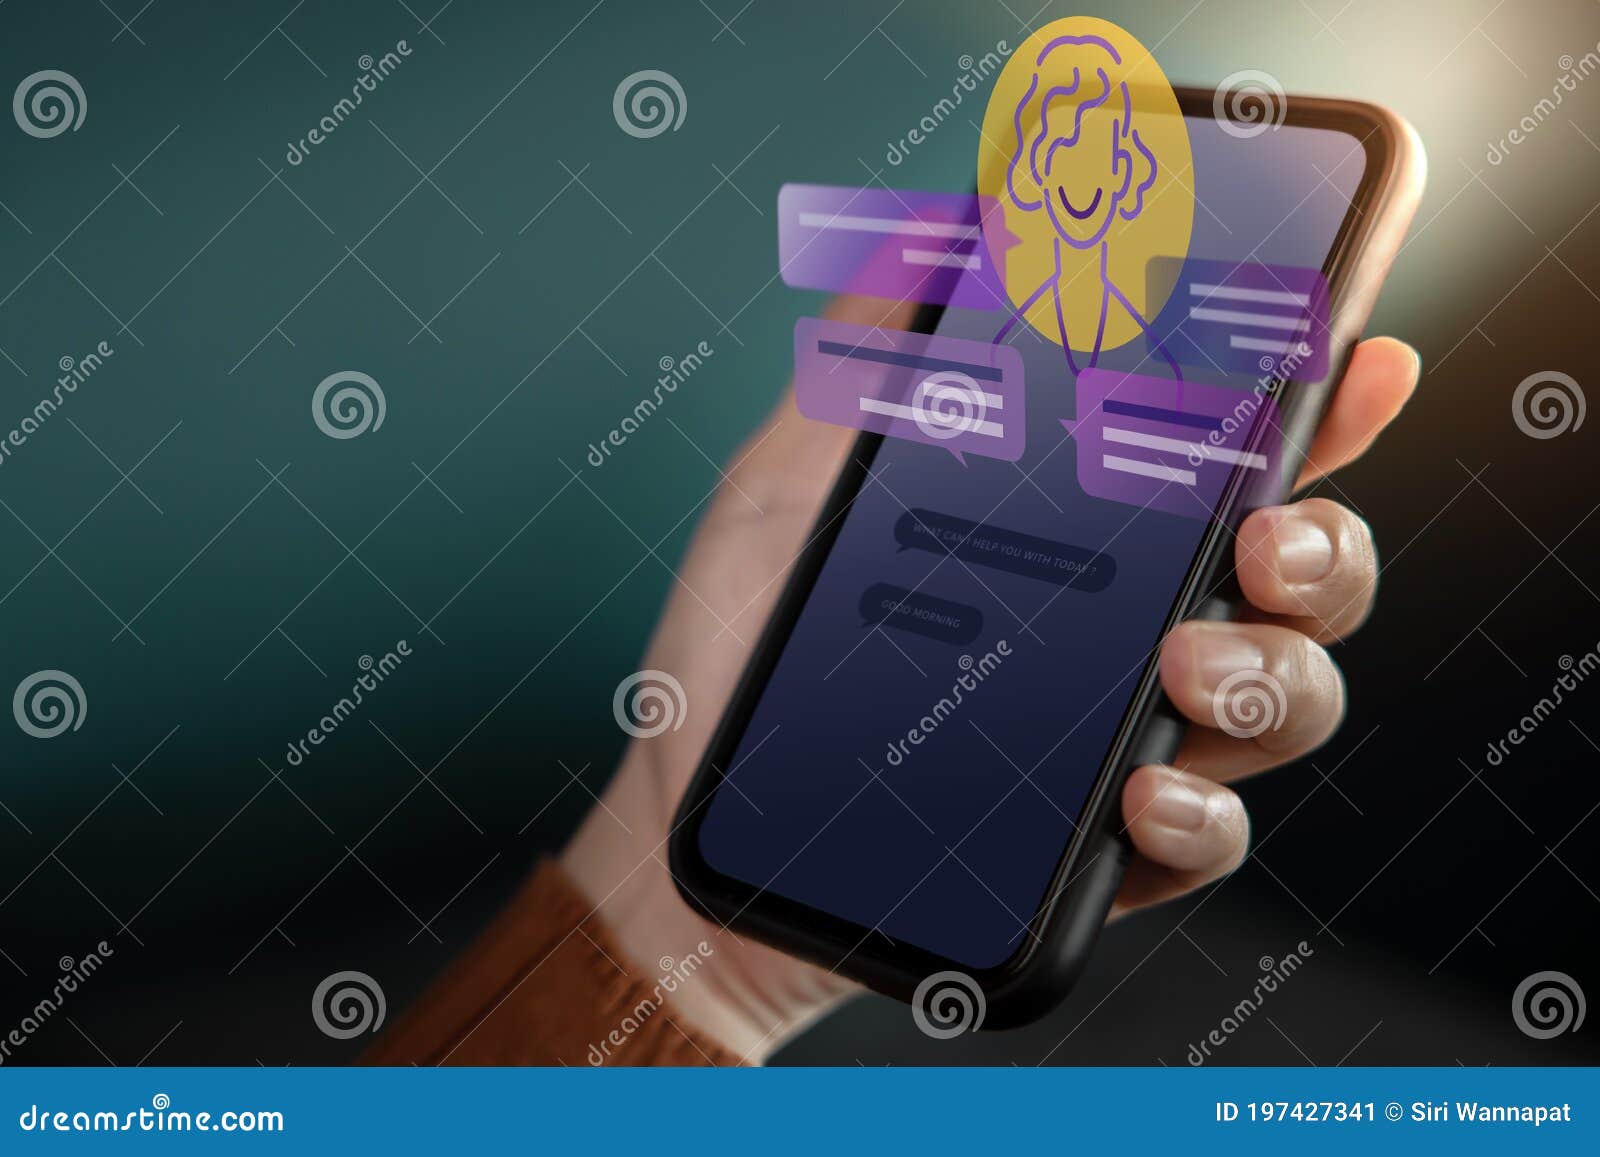 livechat technology concept. customer using mobile phone to make conversation with an artificial intelligence . virtual assistant